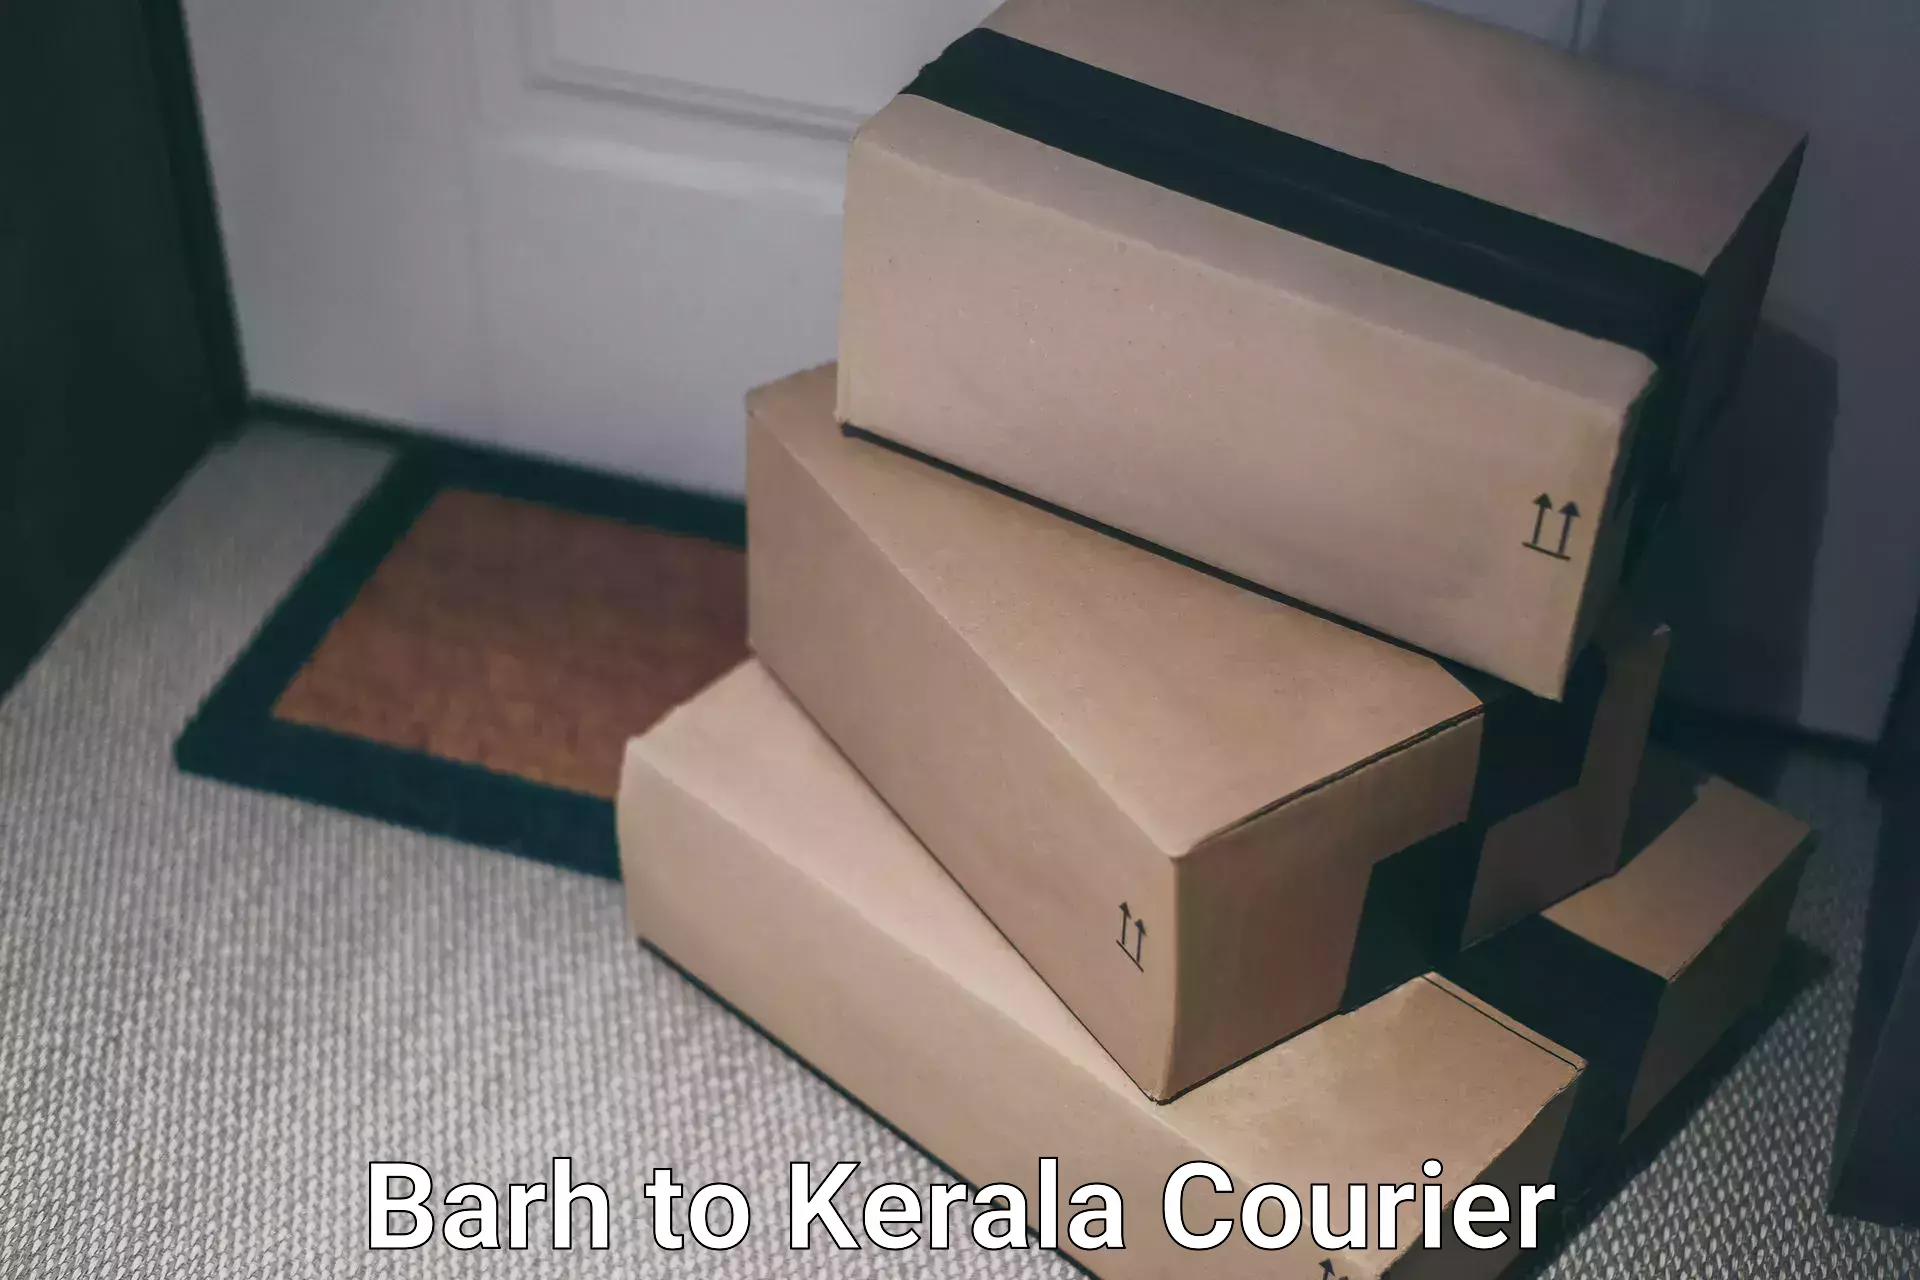 Reliable courier service Barh to Trivandrum